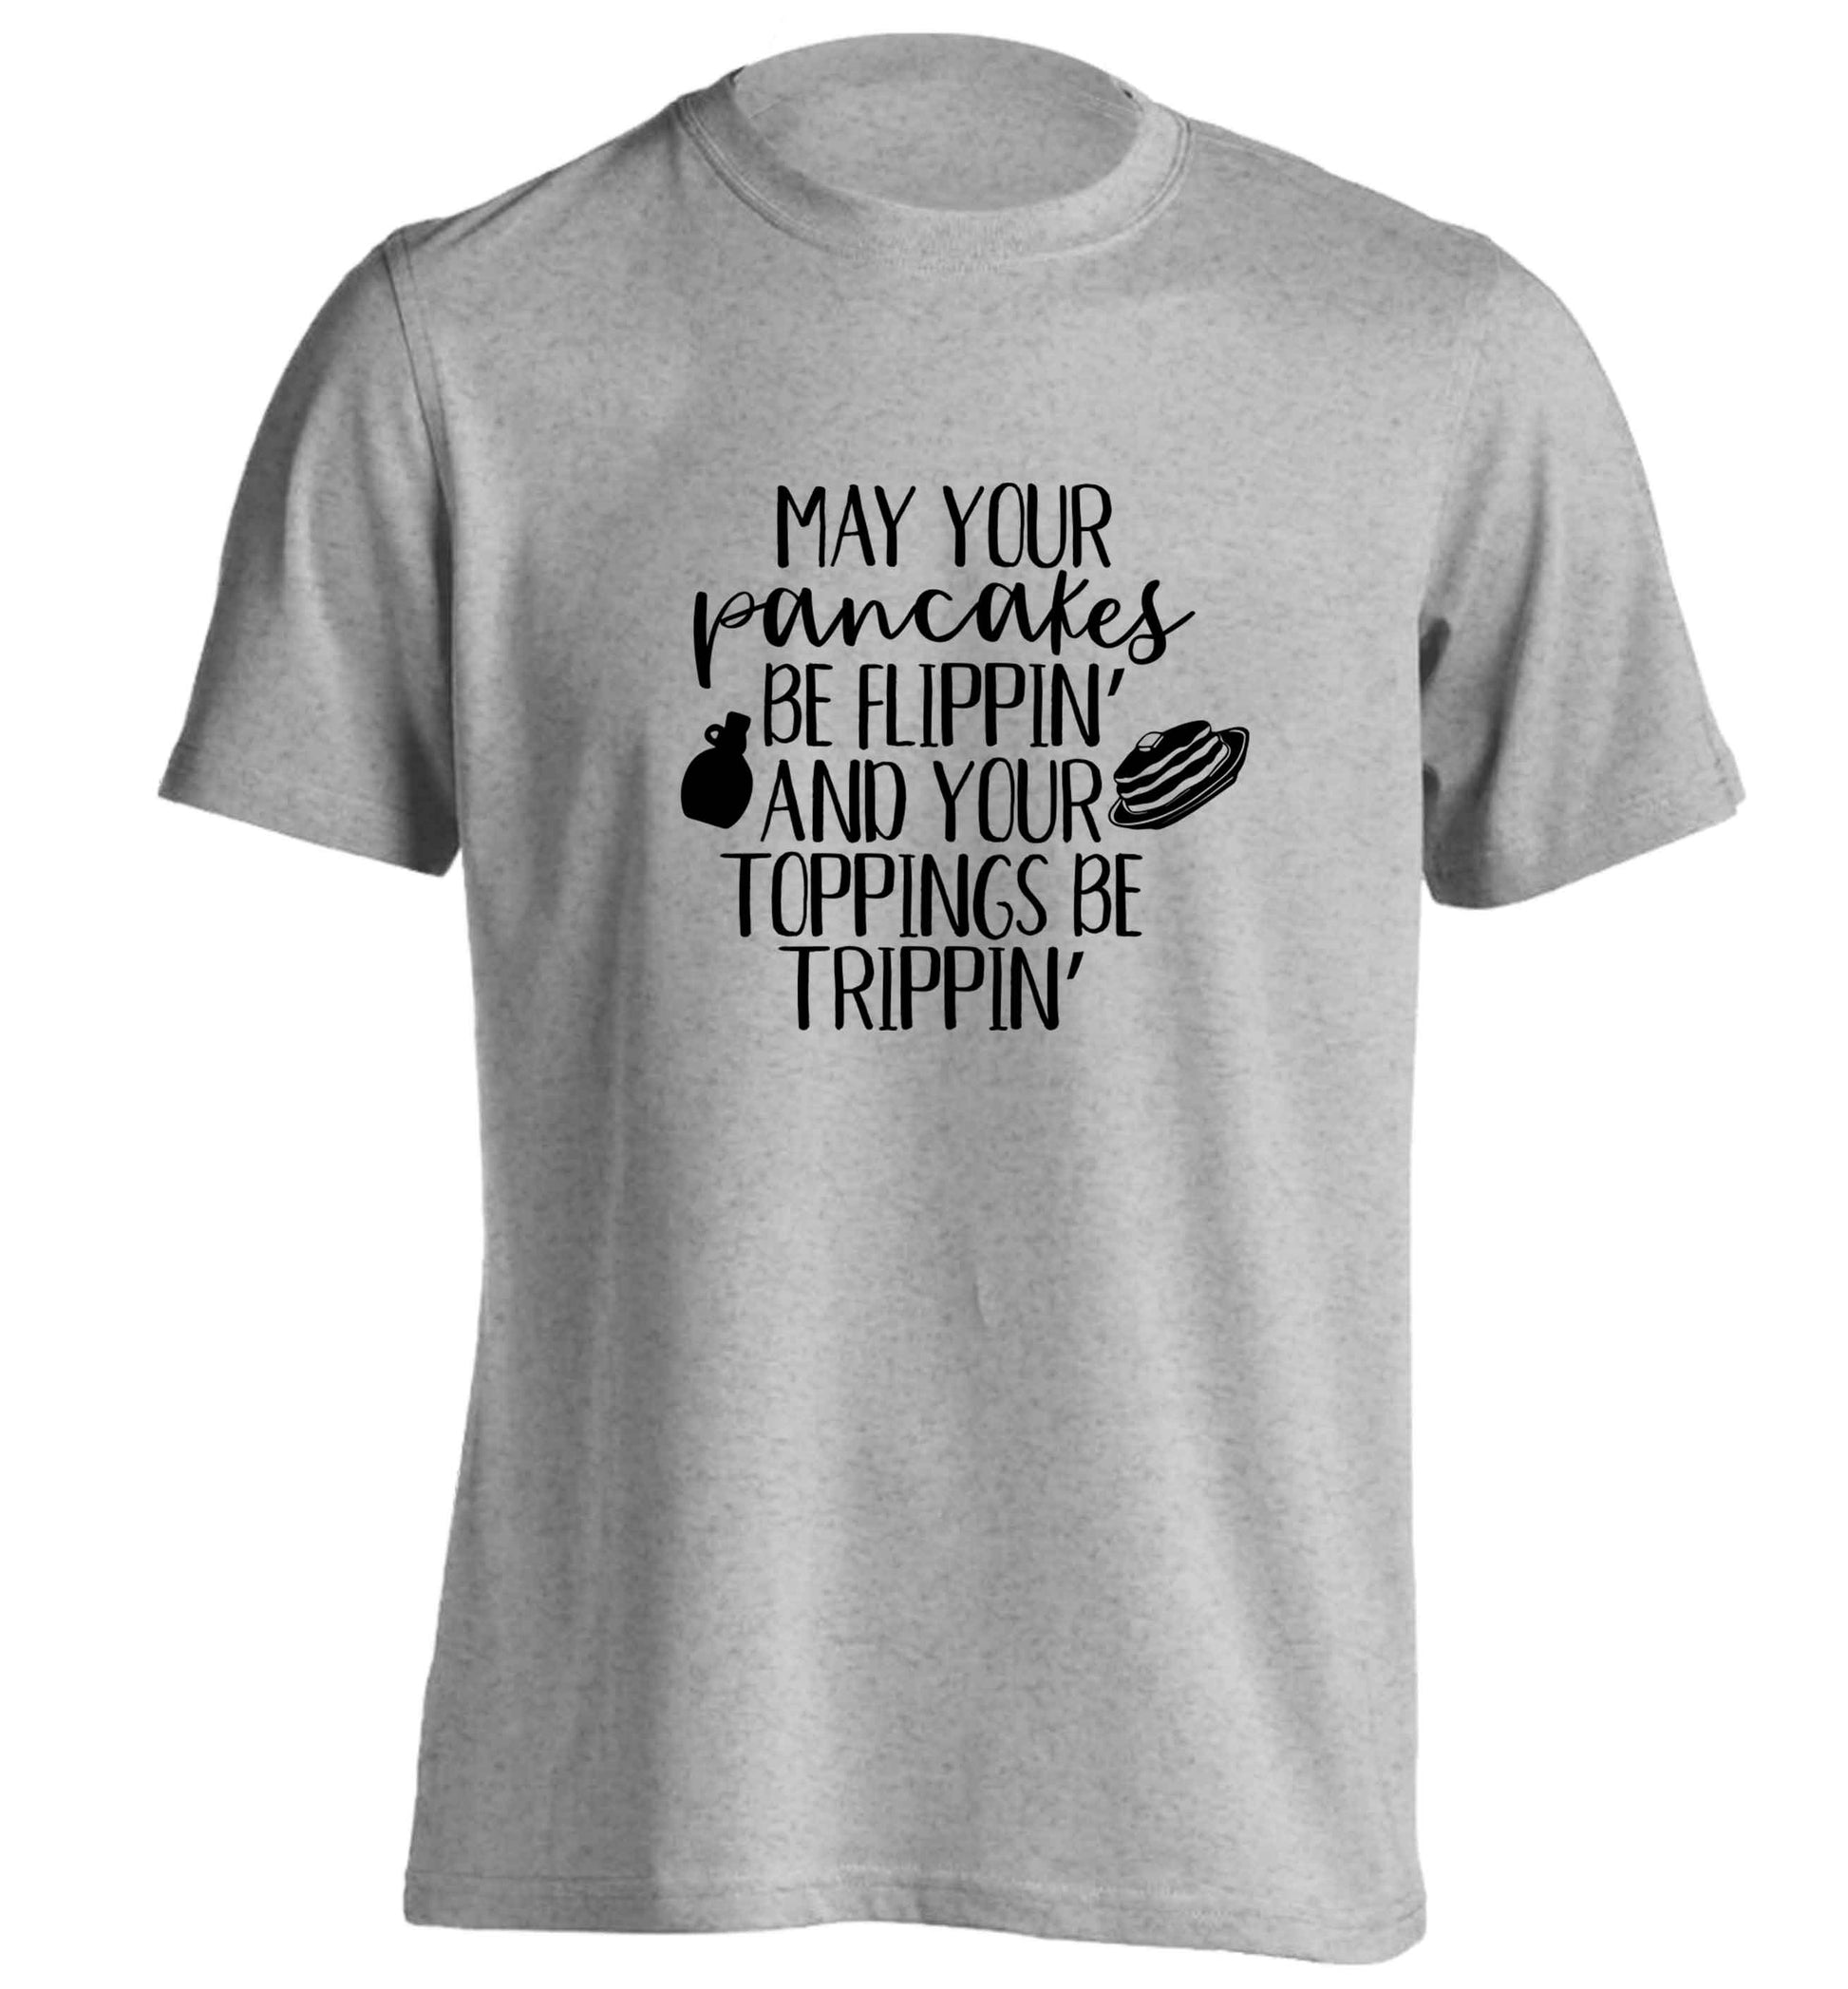 May your pancakes be flippin' and your toppings be trippin' adults unisex grey Tshirt 2XL